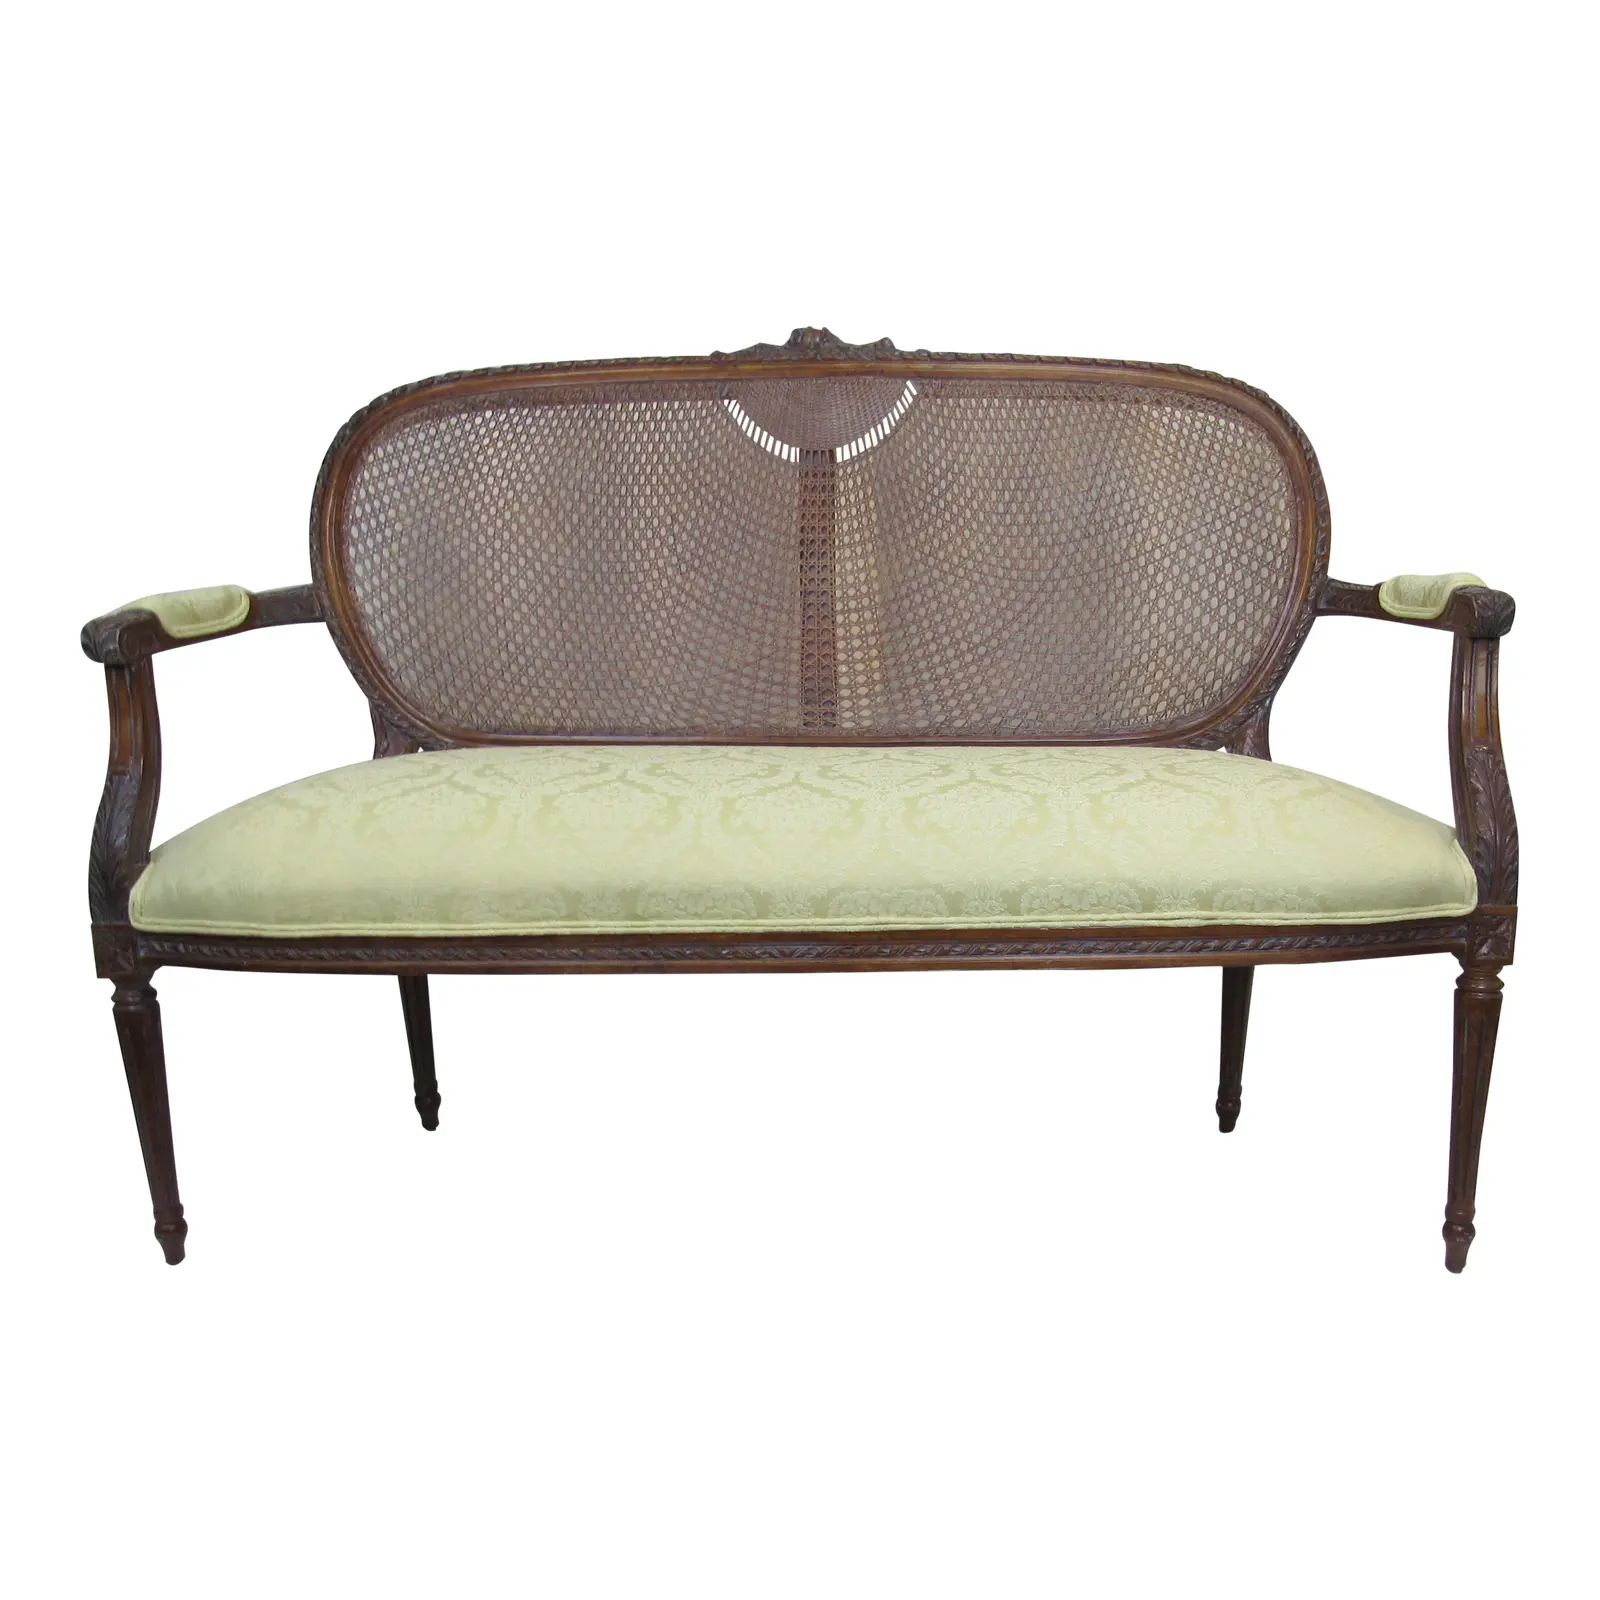 Fairfield Furniture Company French Style Cane Back Settee | Chairish